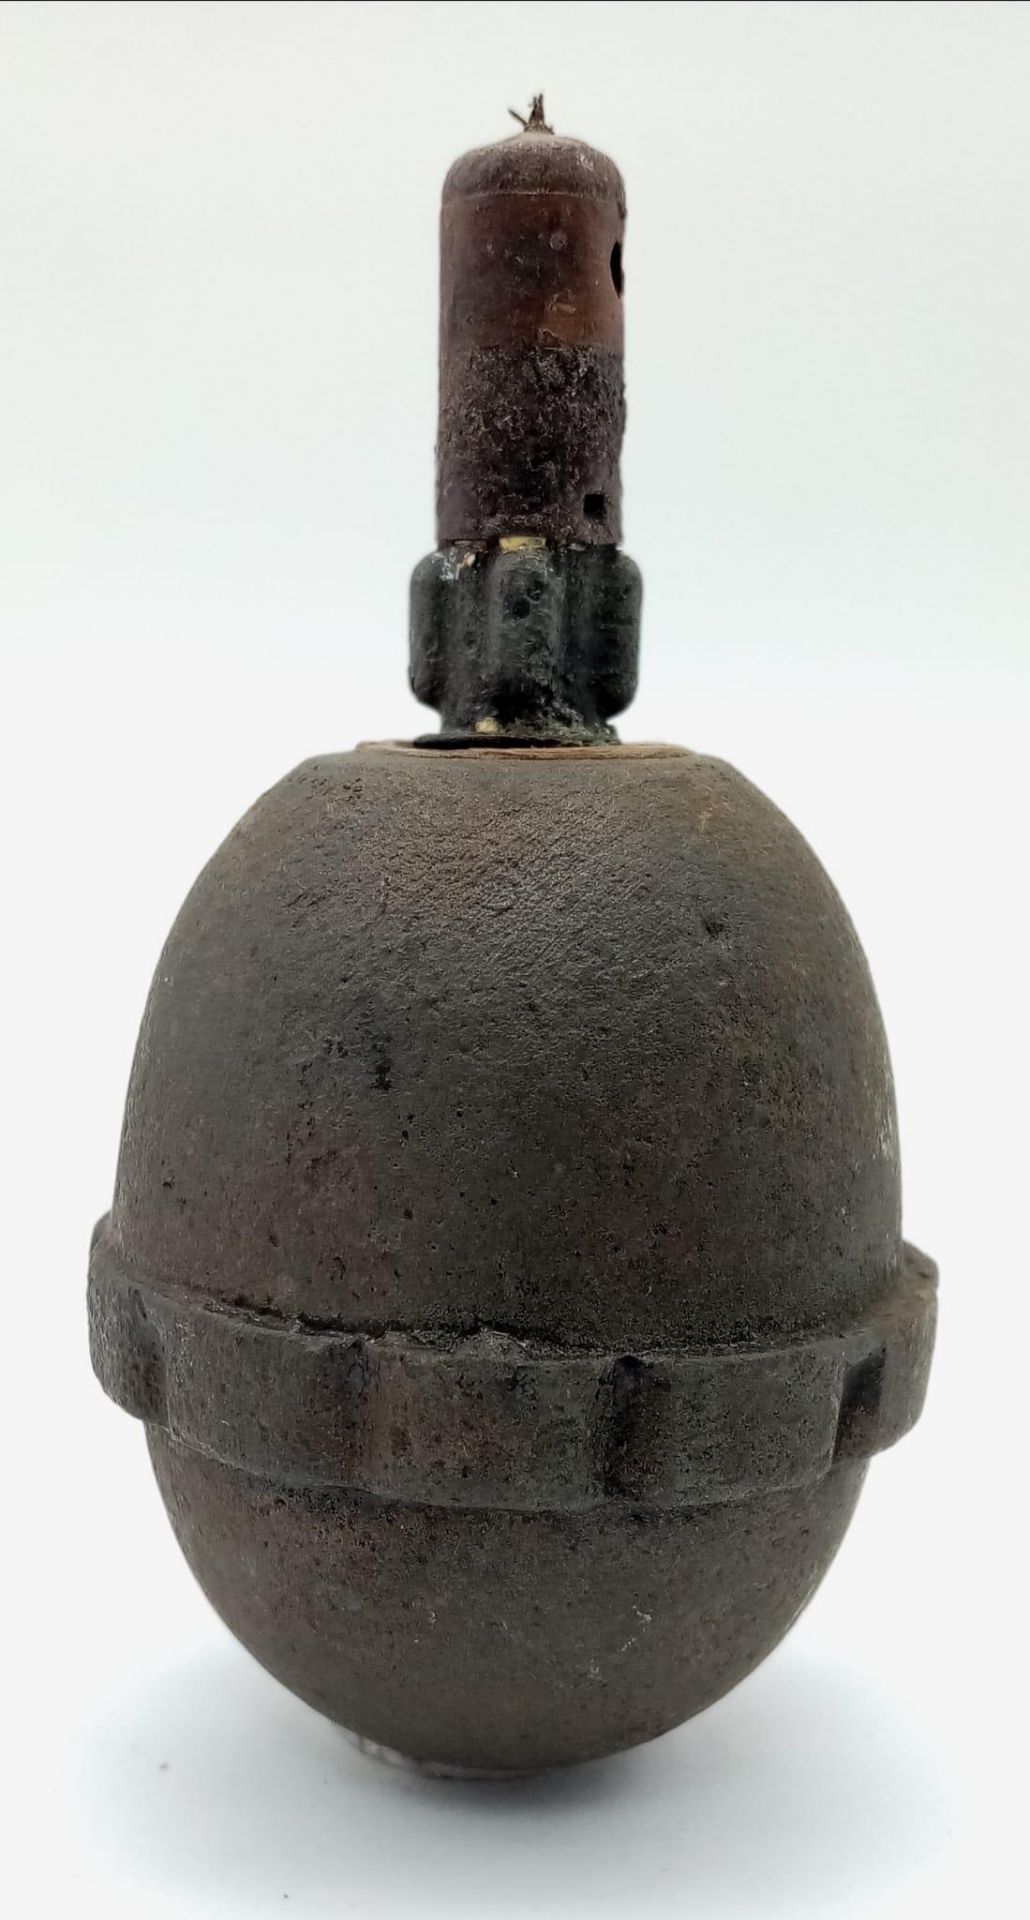 INERT WW1 German Model 1917 Egg Grenade With Pull Fuse. UK Mainland Sales Only.